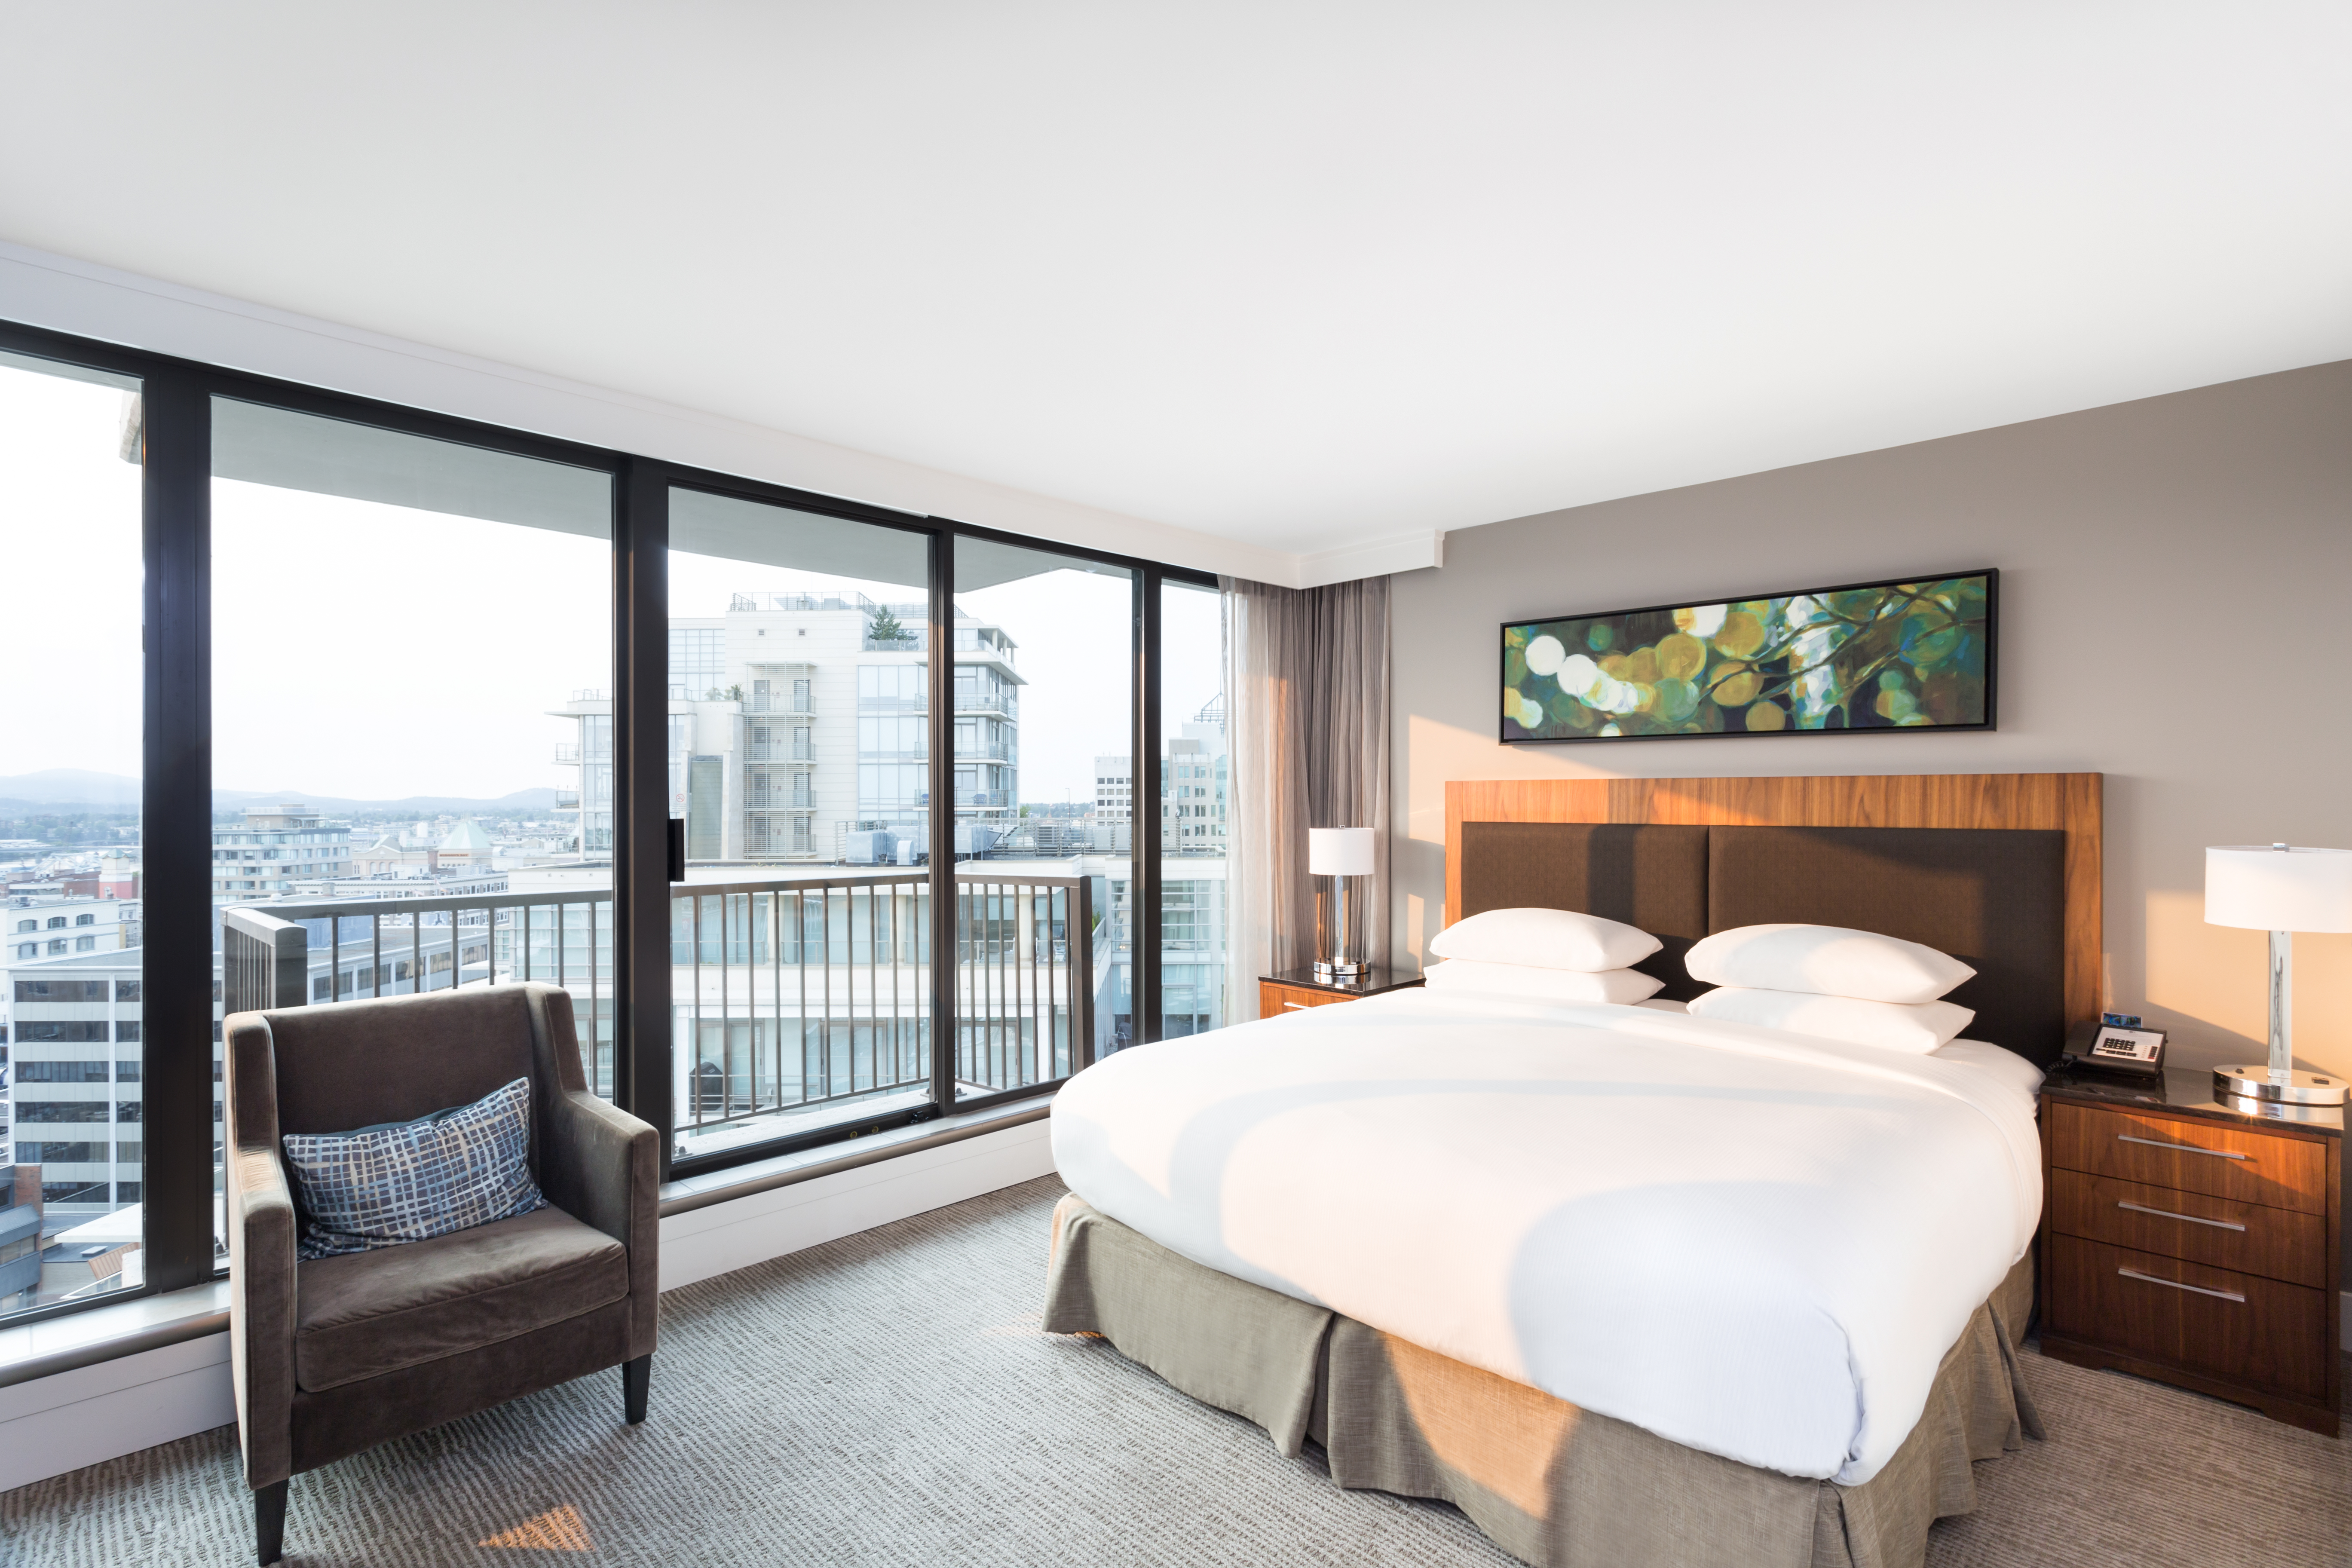 King-Sized Bed with Bed Tables, aChair by Window, and a Balcony That Overlooks the City in a Standard Guest Room